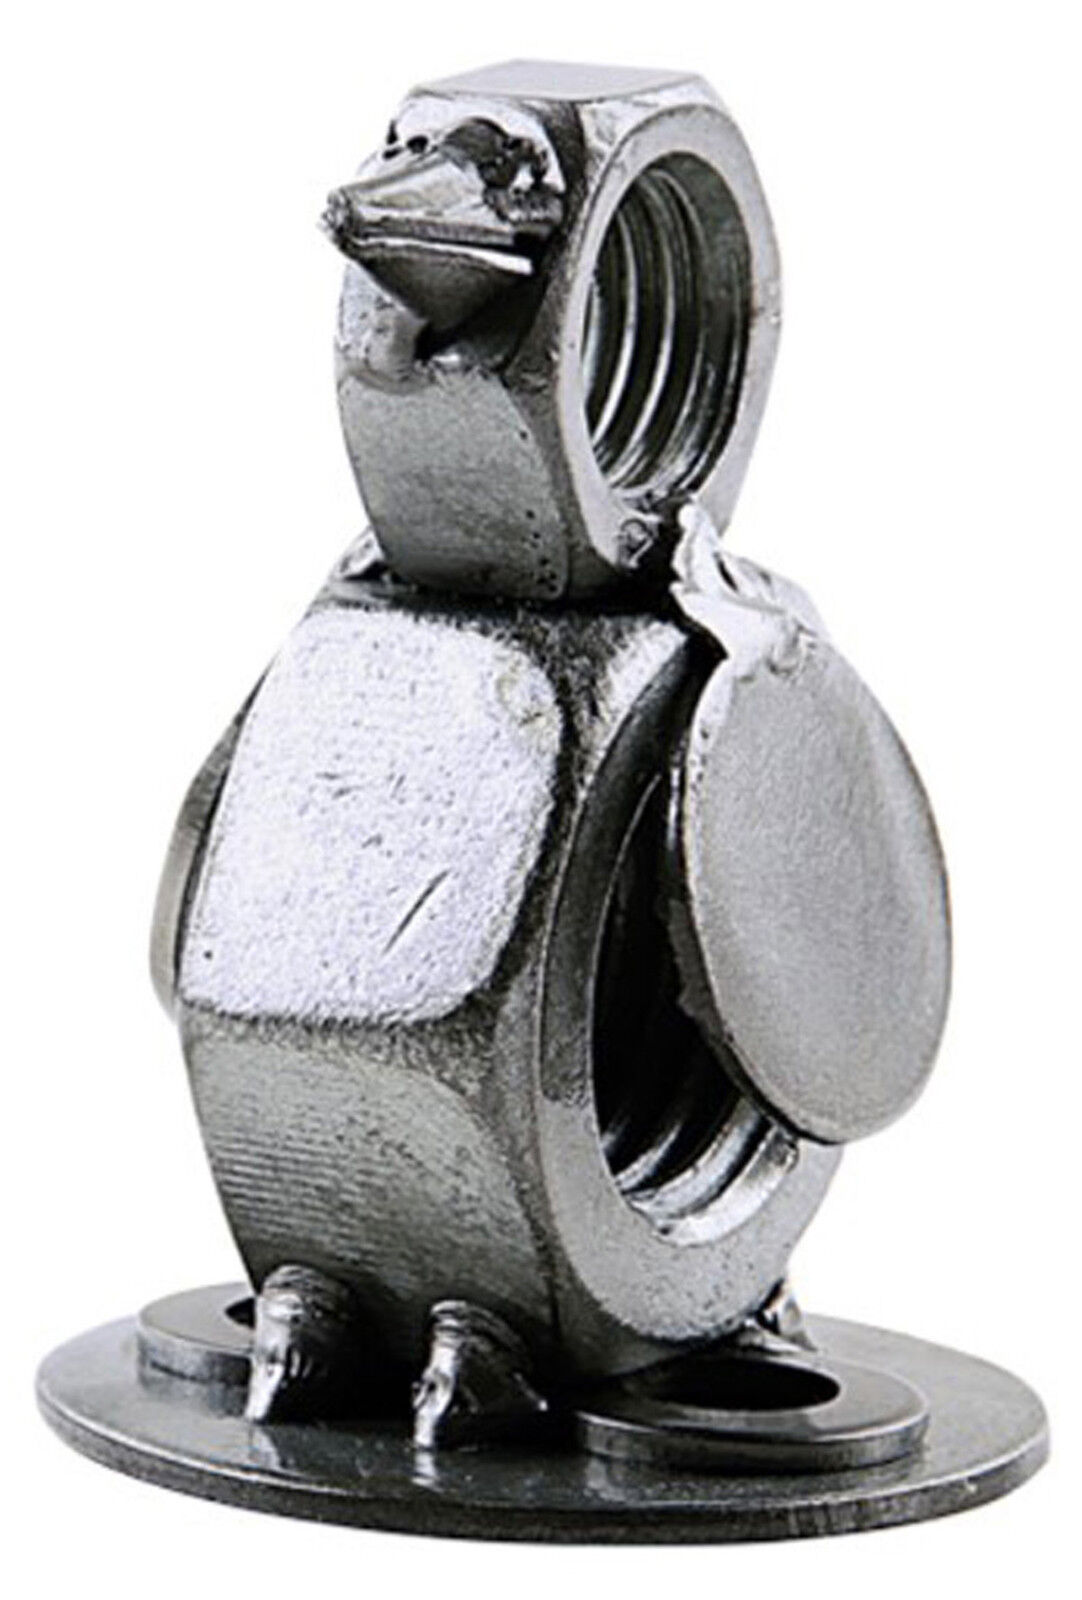 Penguin Hand Crafted Recycled Metal Art Sculpture Figurine  